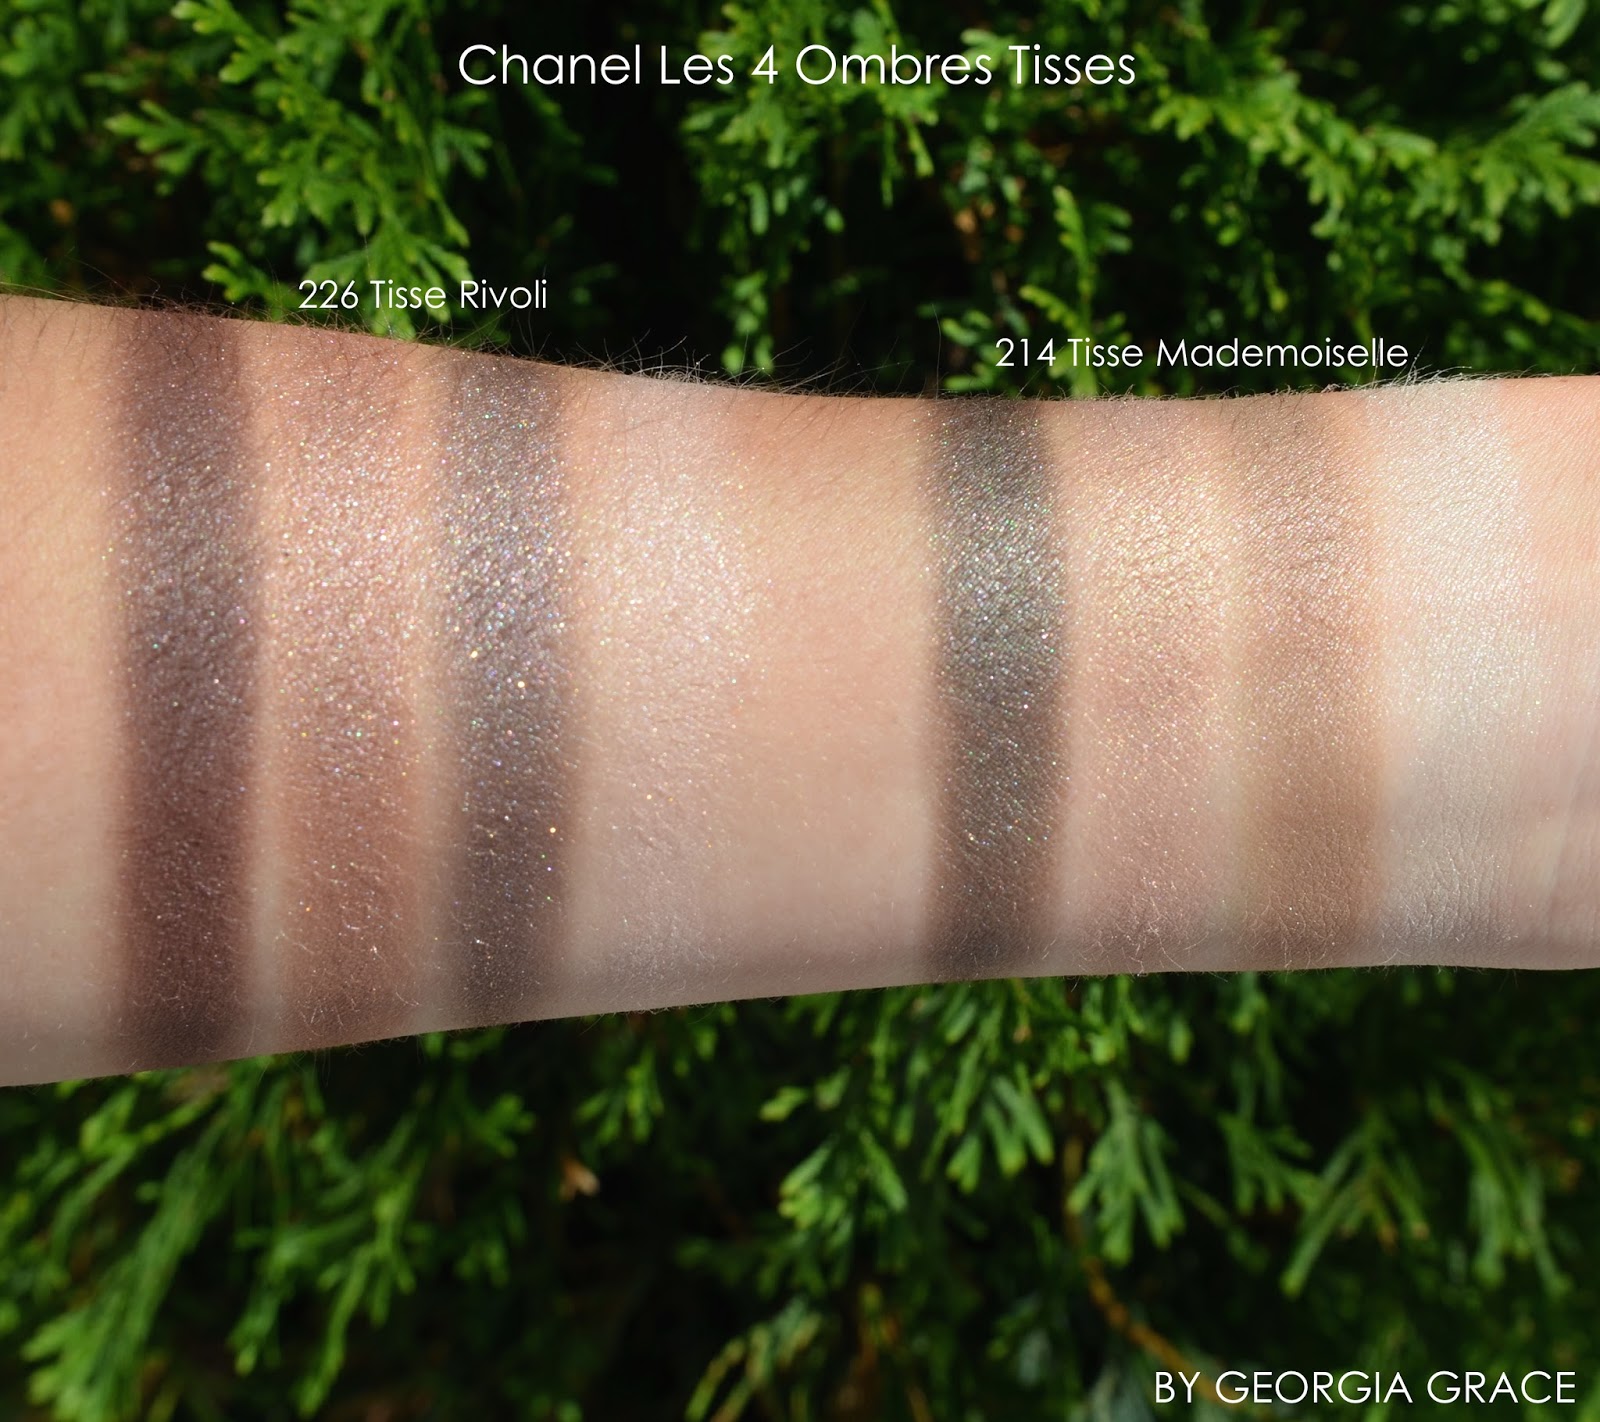 Chanel Les 4 Ombres Eyeshadow Quads Swatches of All Shades | By Georgia Grace